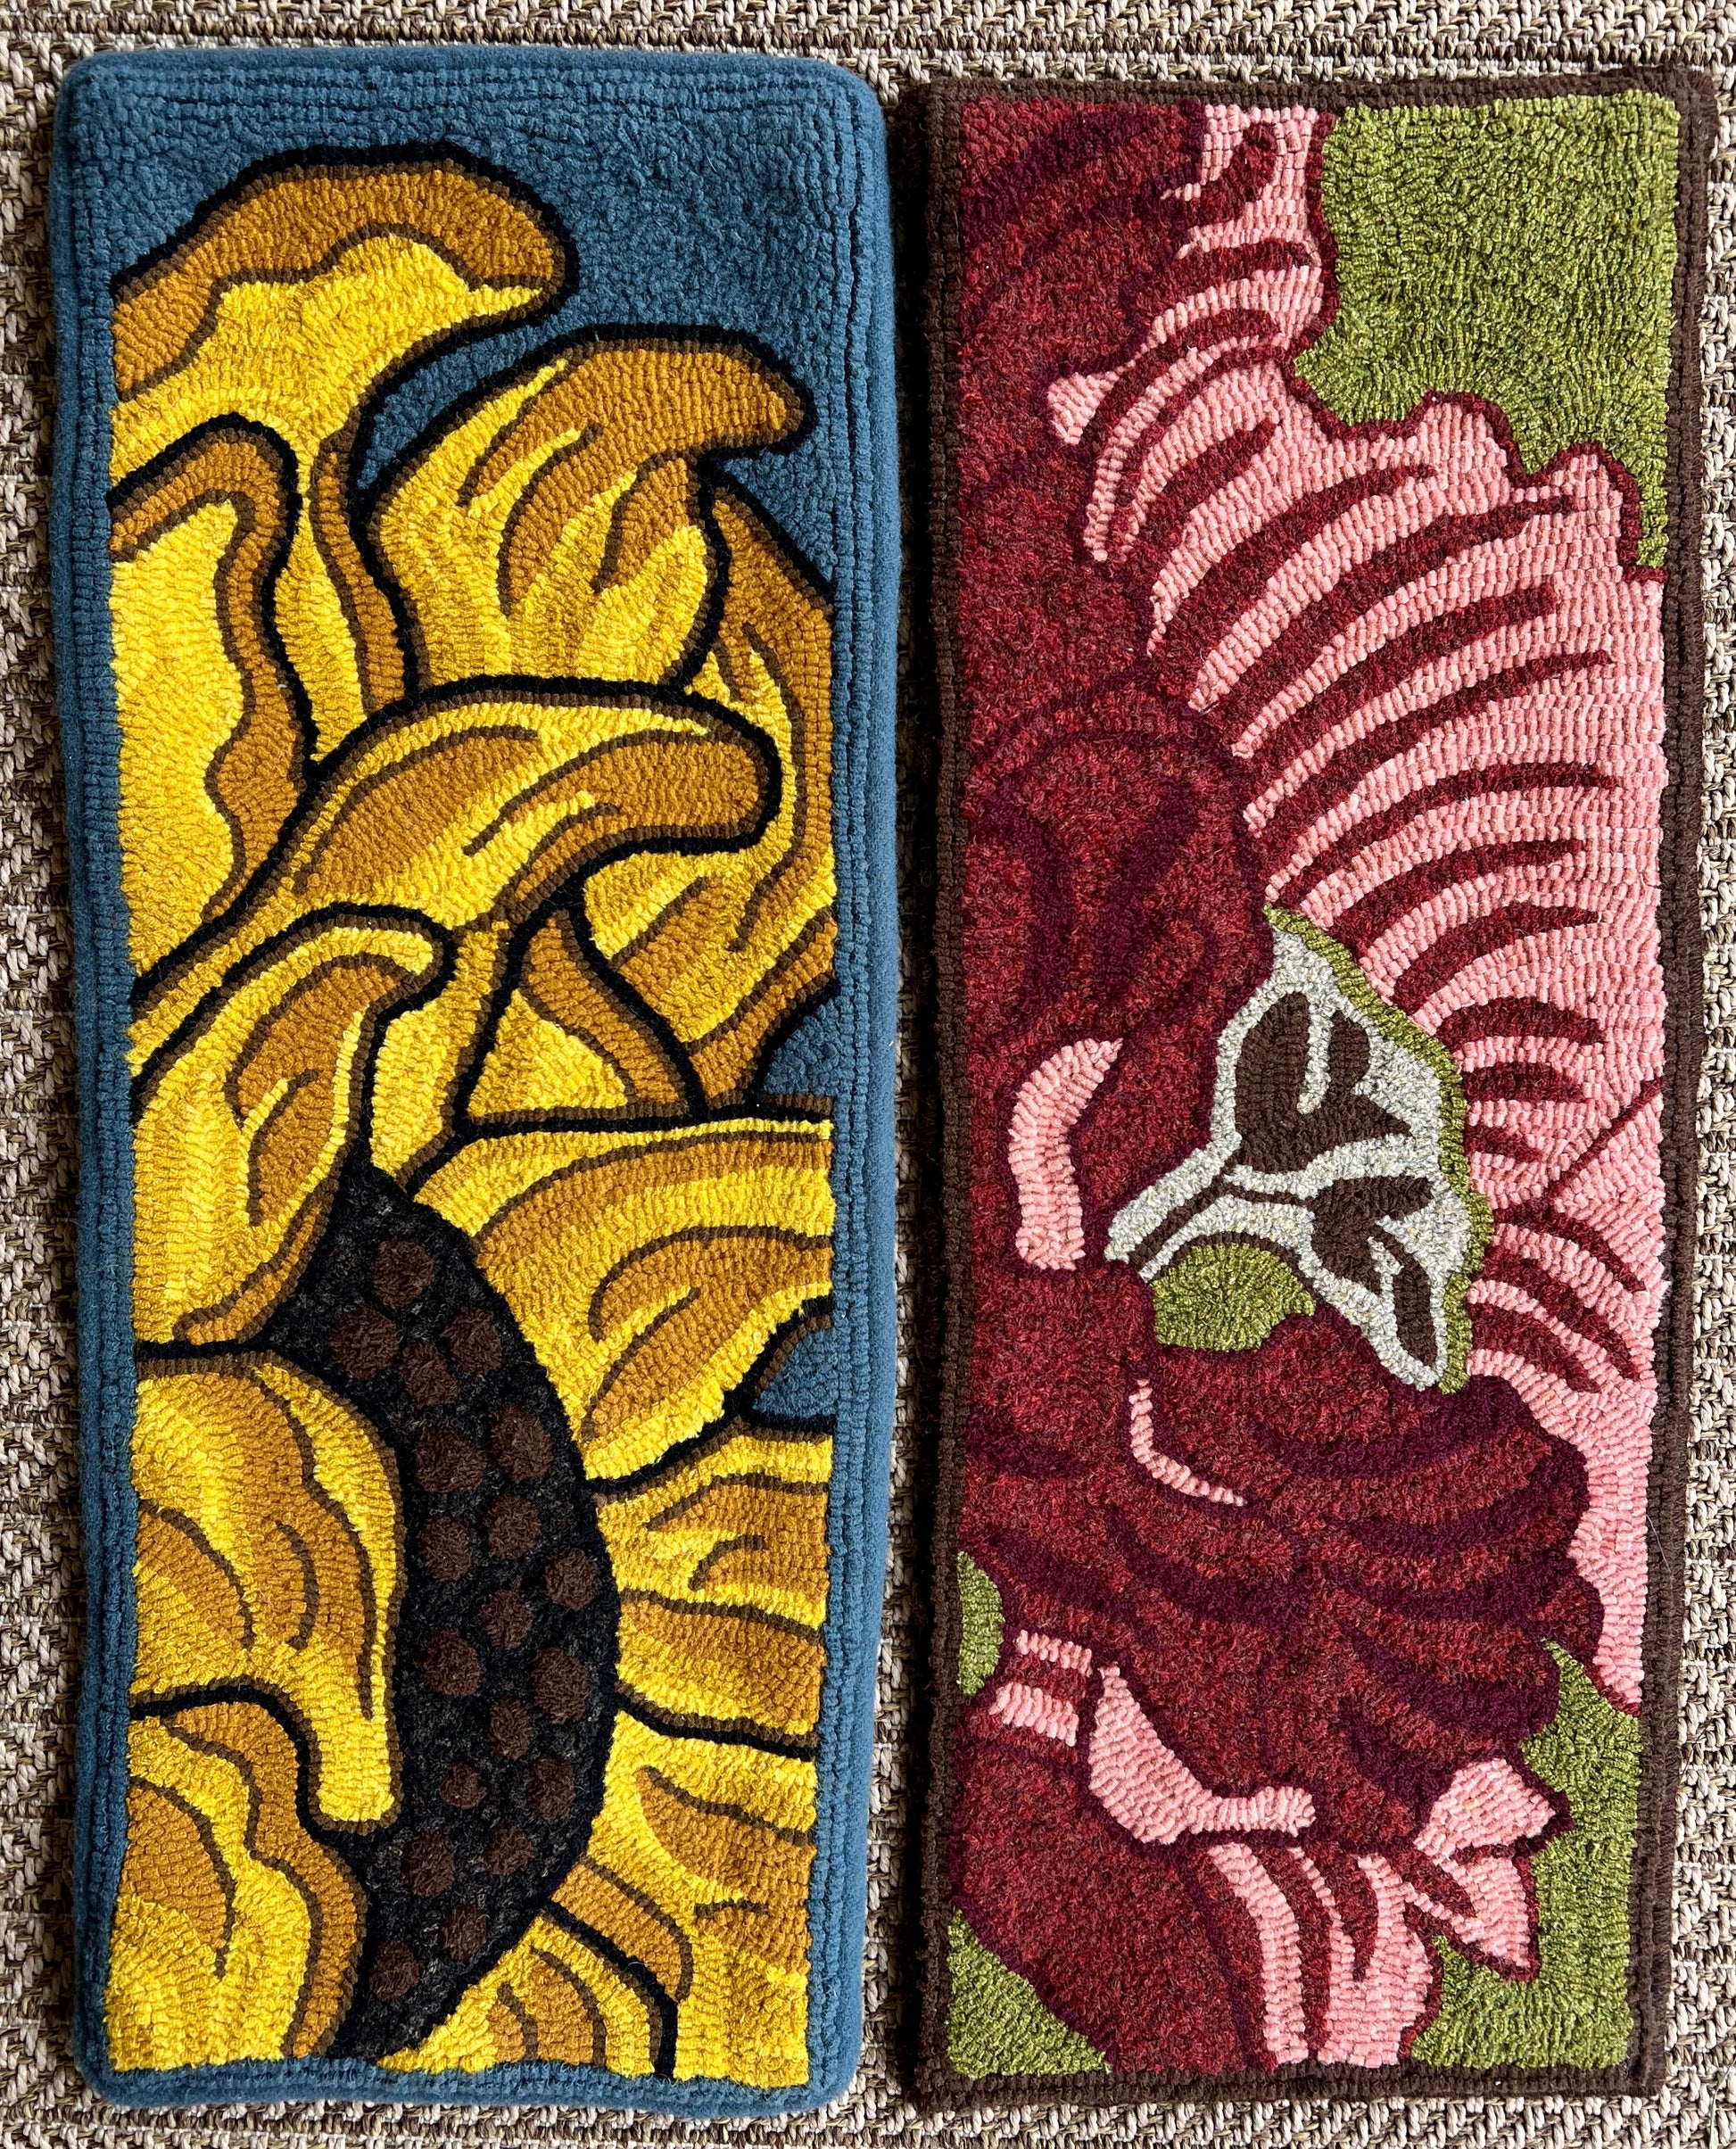  Sunflower- PDF Rug Hooking Digital Download Pattern By Orphaned Wool. This is a 5 page downloadable file of an abstract floral sunflower design. Pattern is designed to be enlarged with several size selections. Copyright © 2023 Kelly Kanyok